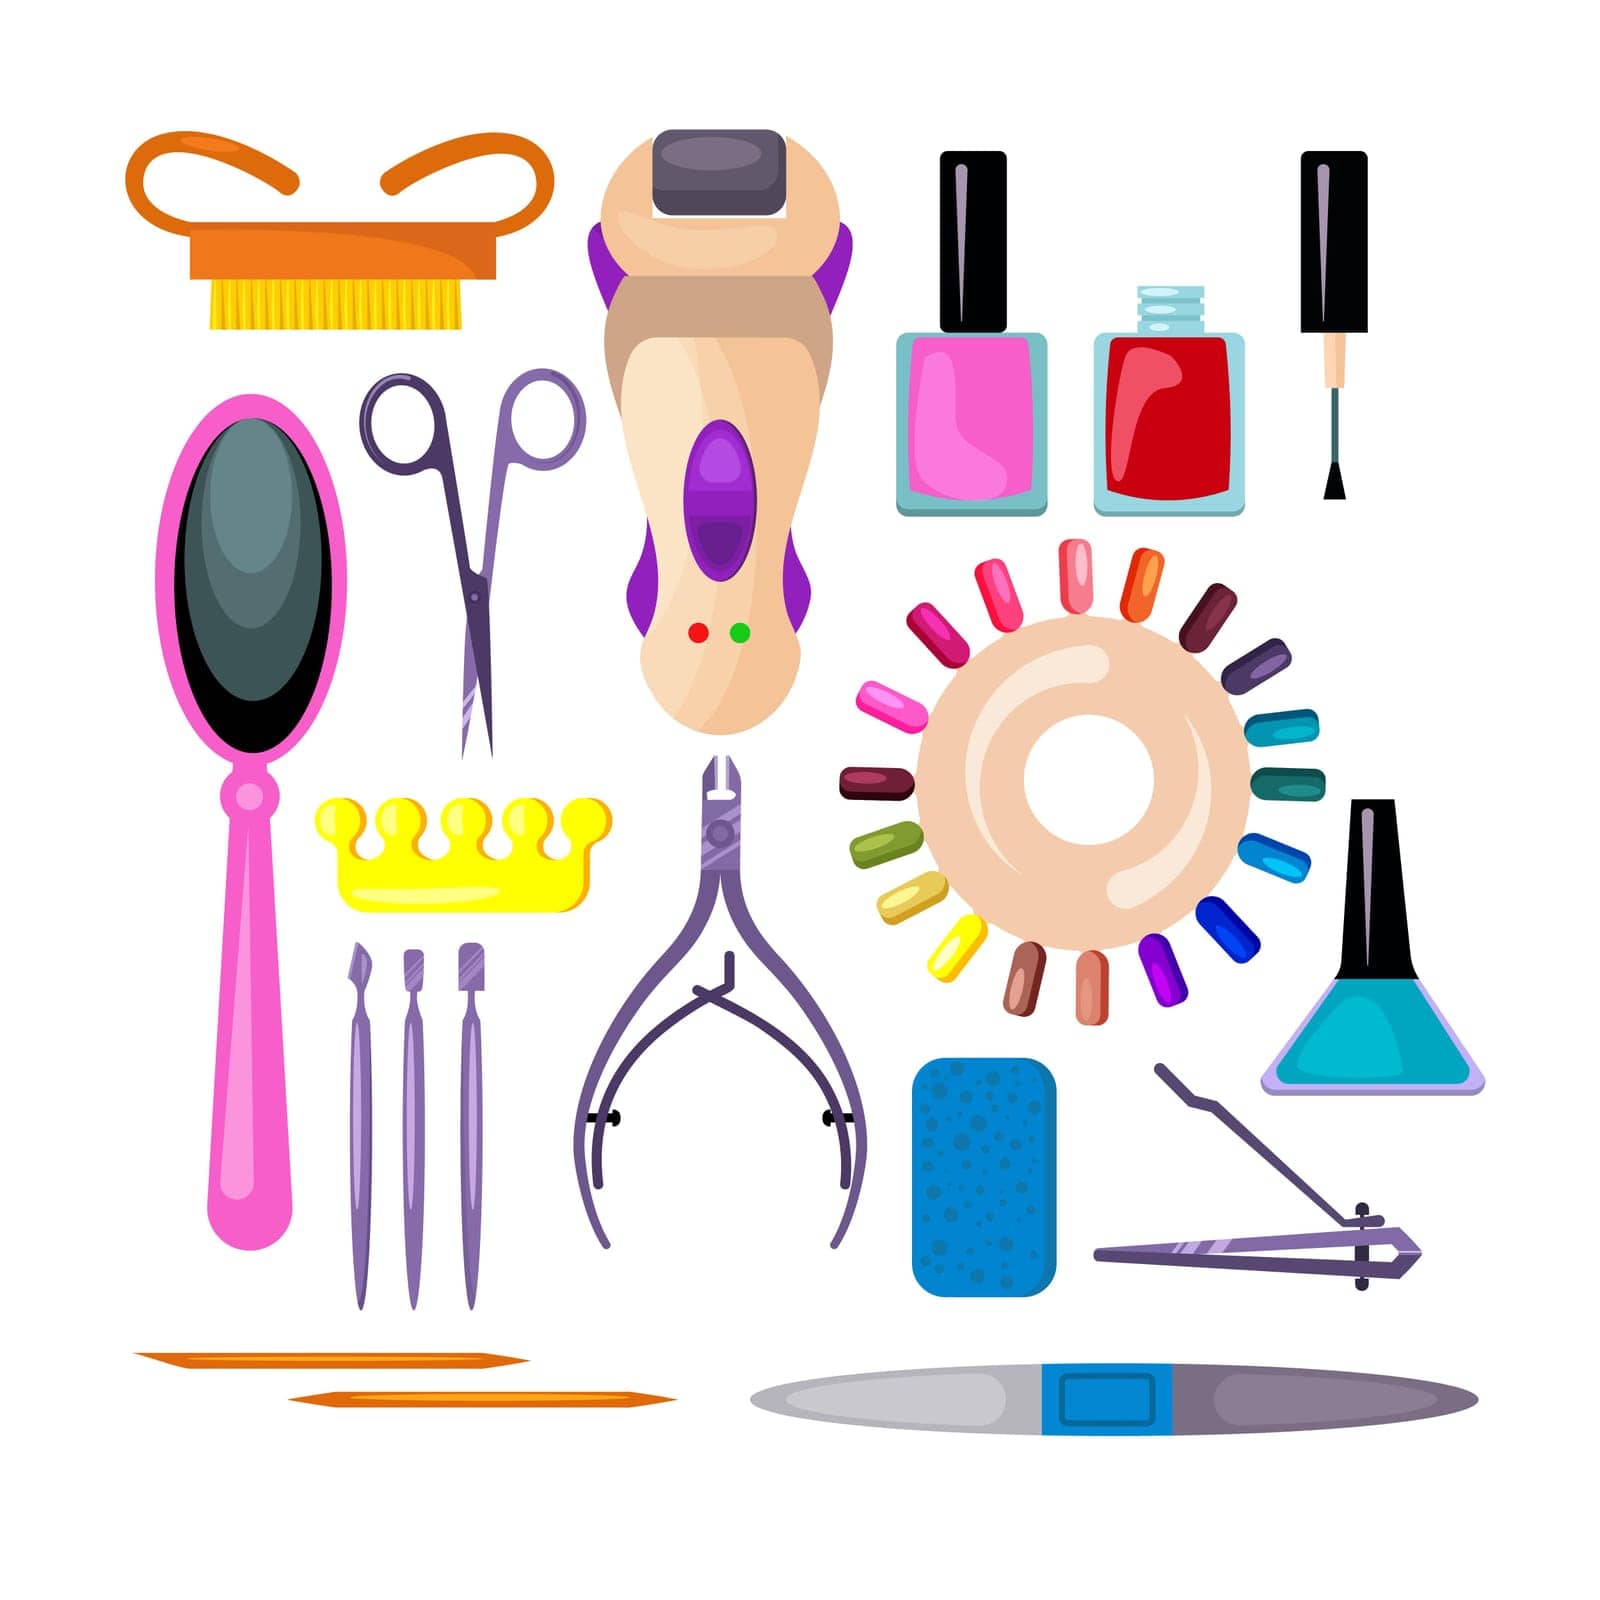 Manicure and pedicure set by pchvector